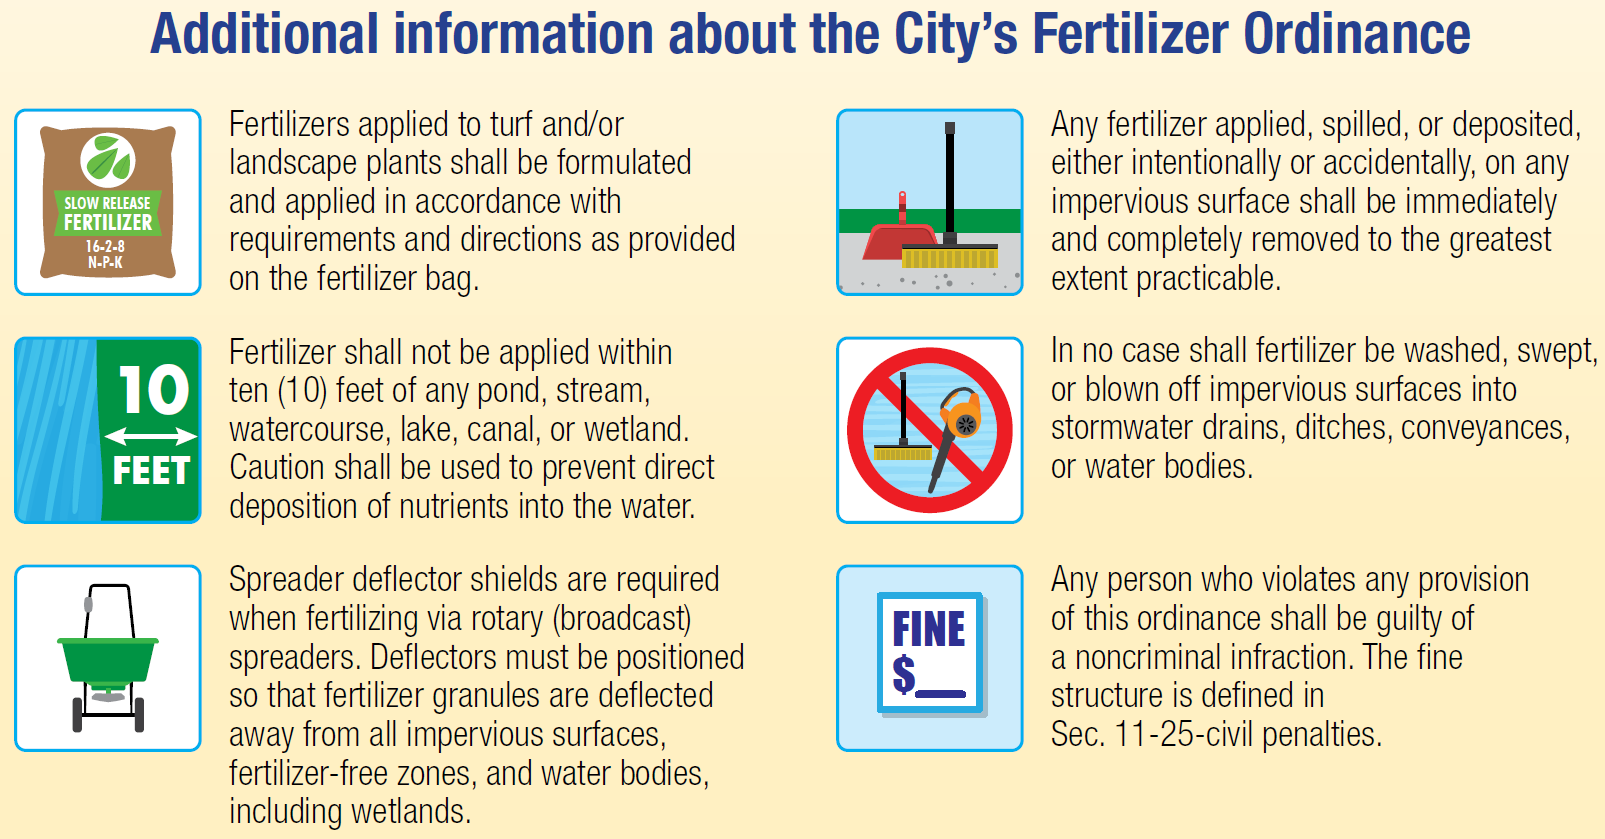 Additional information about the City's fertilizer ordinance